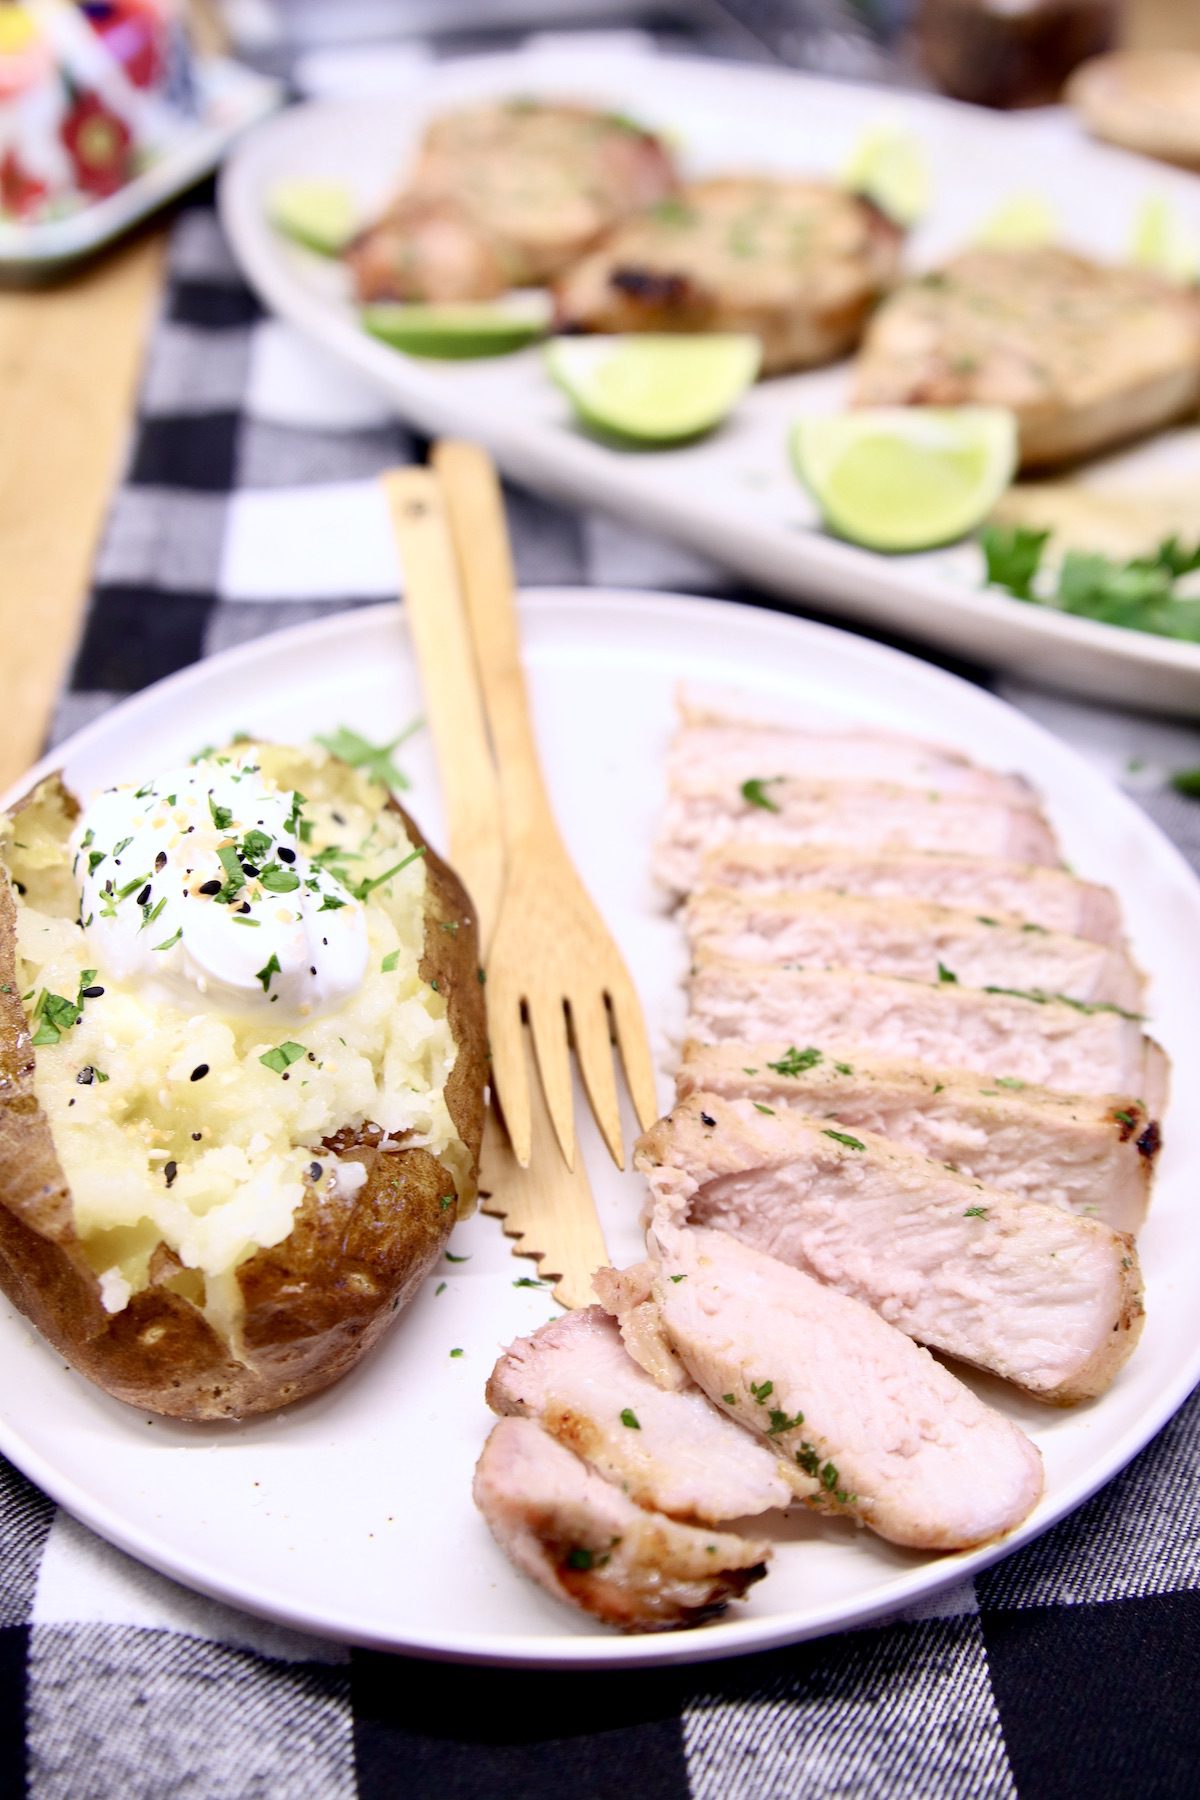 plate with sliced pork chop and baked potato